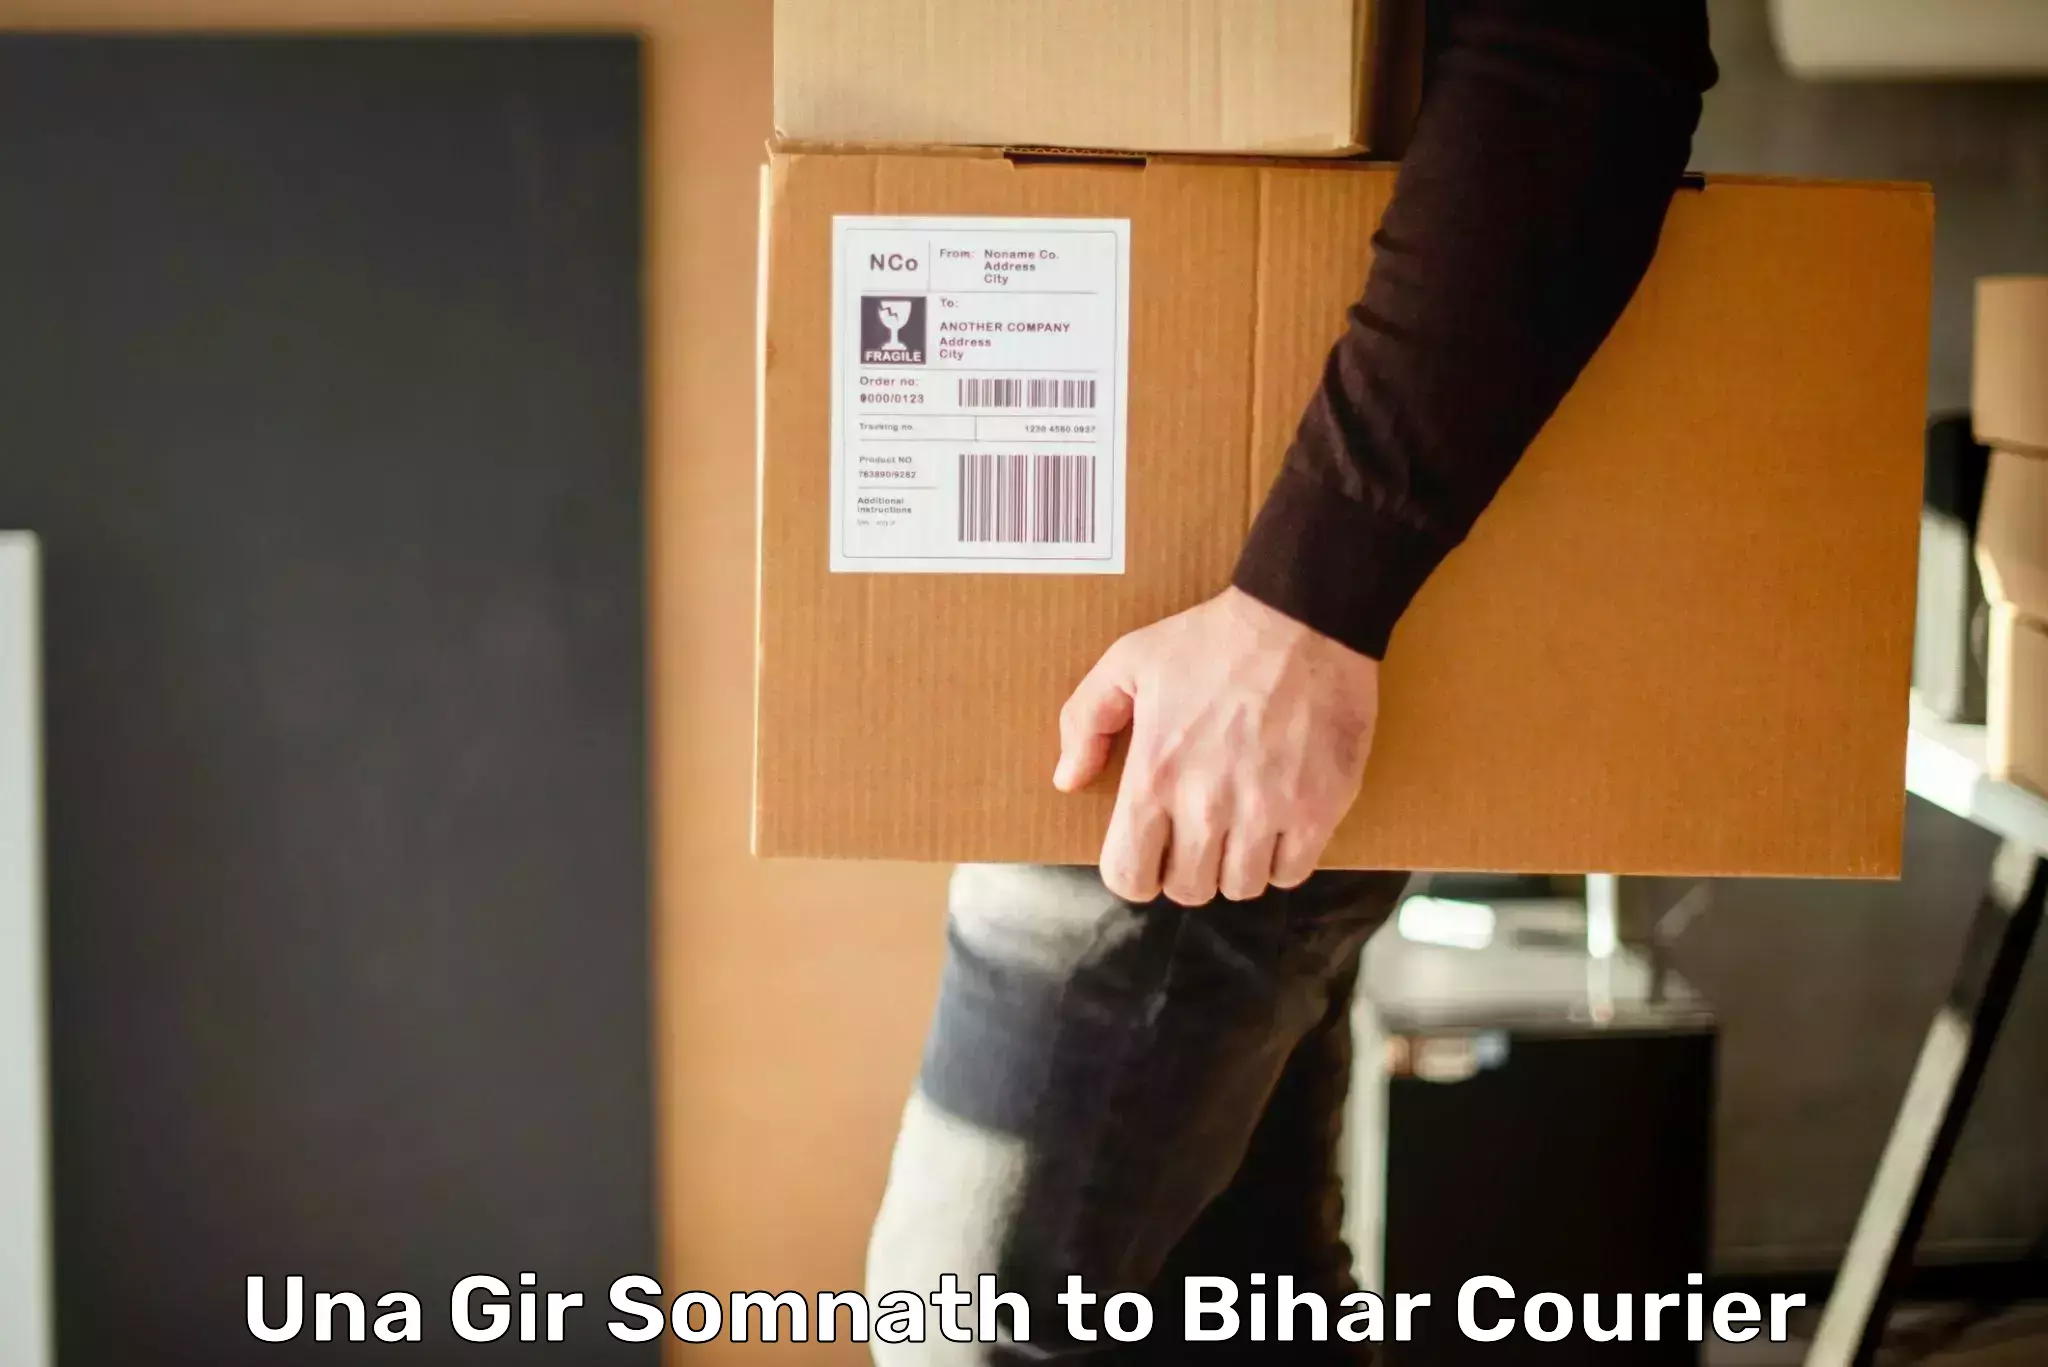 Courier service booking Una Gir Somnath to Barh